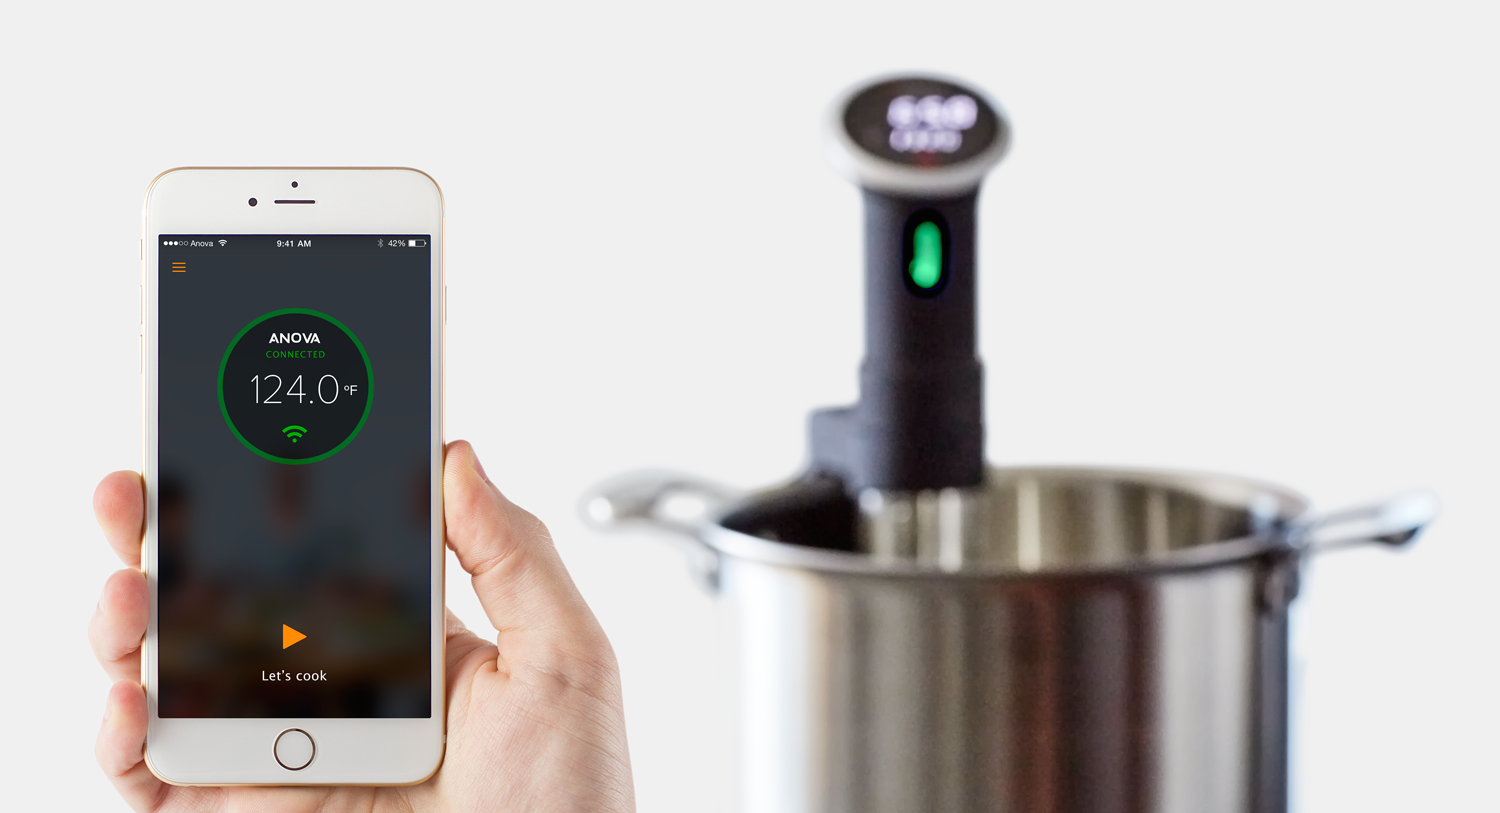 If you’re looking for the ultimate foodie gift, try this precision cooker by Anova. Thermocirculator cuisine is the thing right now everyone raves about - FOODIE GIFT IDEAS - THE ULTIMATE GIFT LIST FOR MODERN MEN